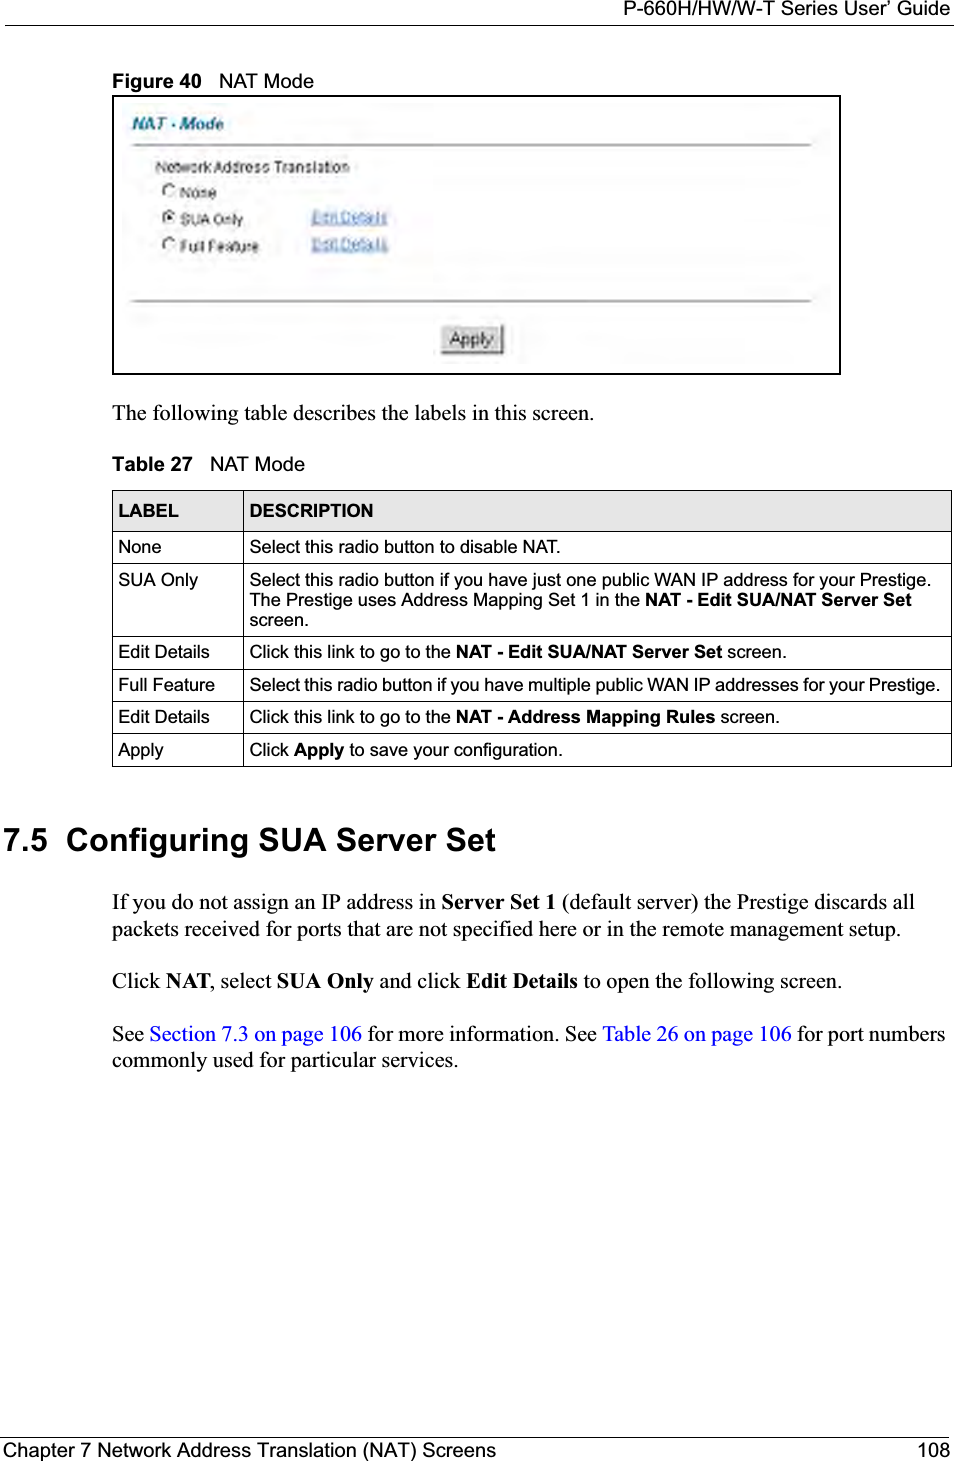 P-660H/HW/W-T Series User’ GuideChapter 7 Network Address Translation (NAT) Screens 108Figure 40   NAT ModeThe following table describes the labels in this screen. 7.5  Configuring SUA Server Set If you do not assign an IP address in Server Set 1 (default server) the Prestige discards all packets received for ports that are not specified here or in the remote management setup.Click NAT, select SUA Only and click Edit Details to open the following screen. See Section 7.3 on page 106 for more information. See Table 26 on page 106 for port numbers commonly used for particular services. Table 27   NAT ModeLABEL DESCRIPTIONNone Select this radio button to disable NAT.SUA Only Select this radio button if you have just one public WAN IP address for your Prestige. The Prestige uses Address Mapping Set 1 in the NAT - Edit SUA/NAT Server Setscreen.Edit Details Click this link to go to the NAT - Edit SUA/NAT Server Set screen. Full Feature  Select this radio button if you have multiple public WAN IP addresses for your Prestige. Edit Details Click this link to go to the NAT - Address Mapping Rules screen.Apply Click Apply to save your configuration.